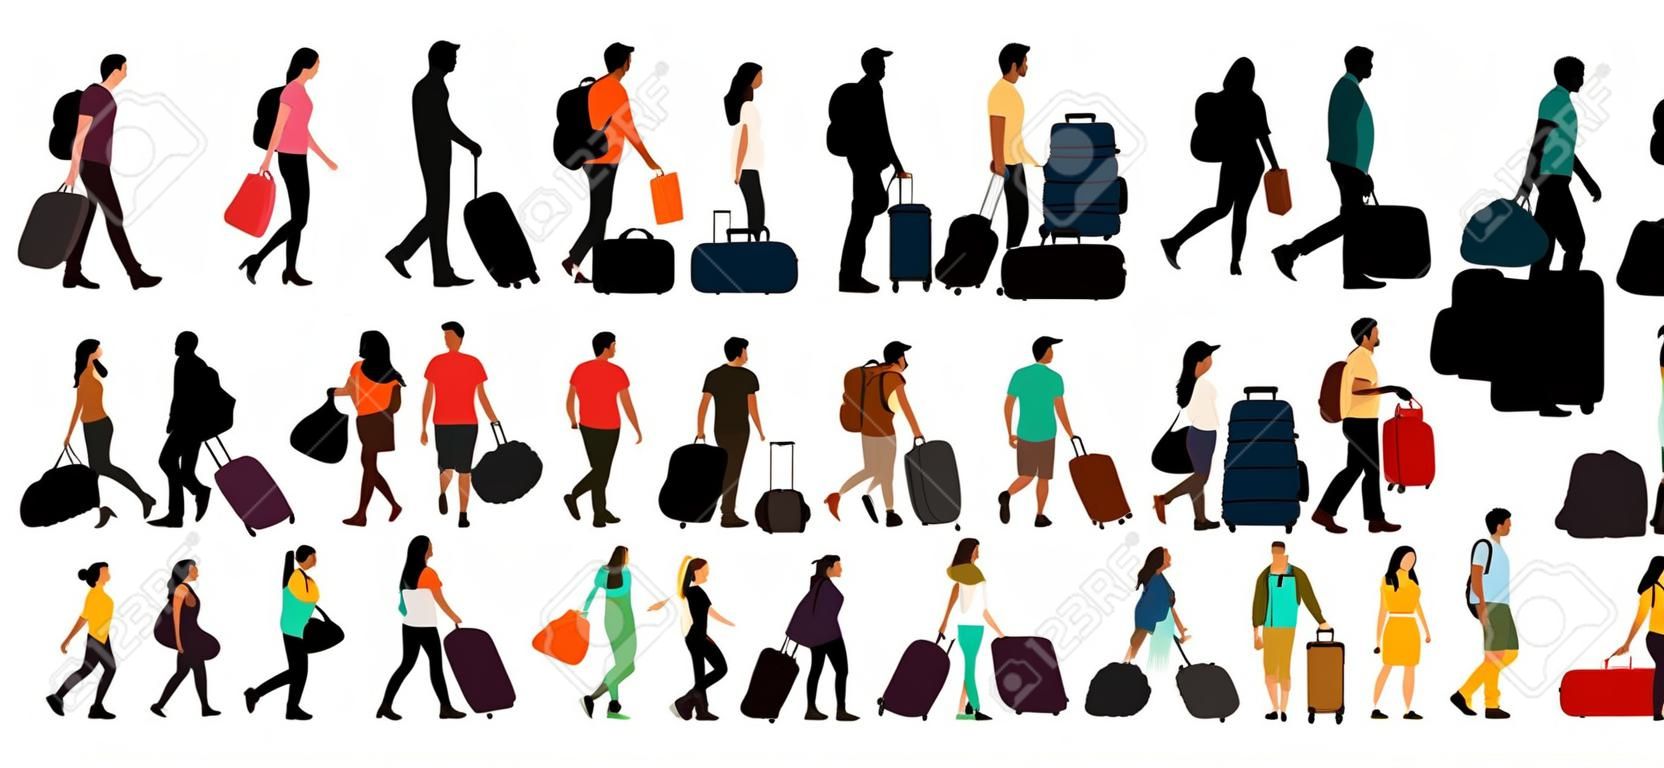 People with suitcases and bags. Isolated set on a white background. Vector silhouette illustration